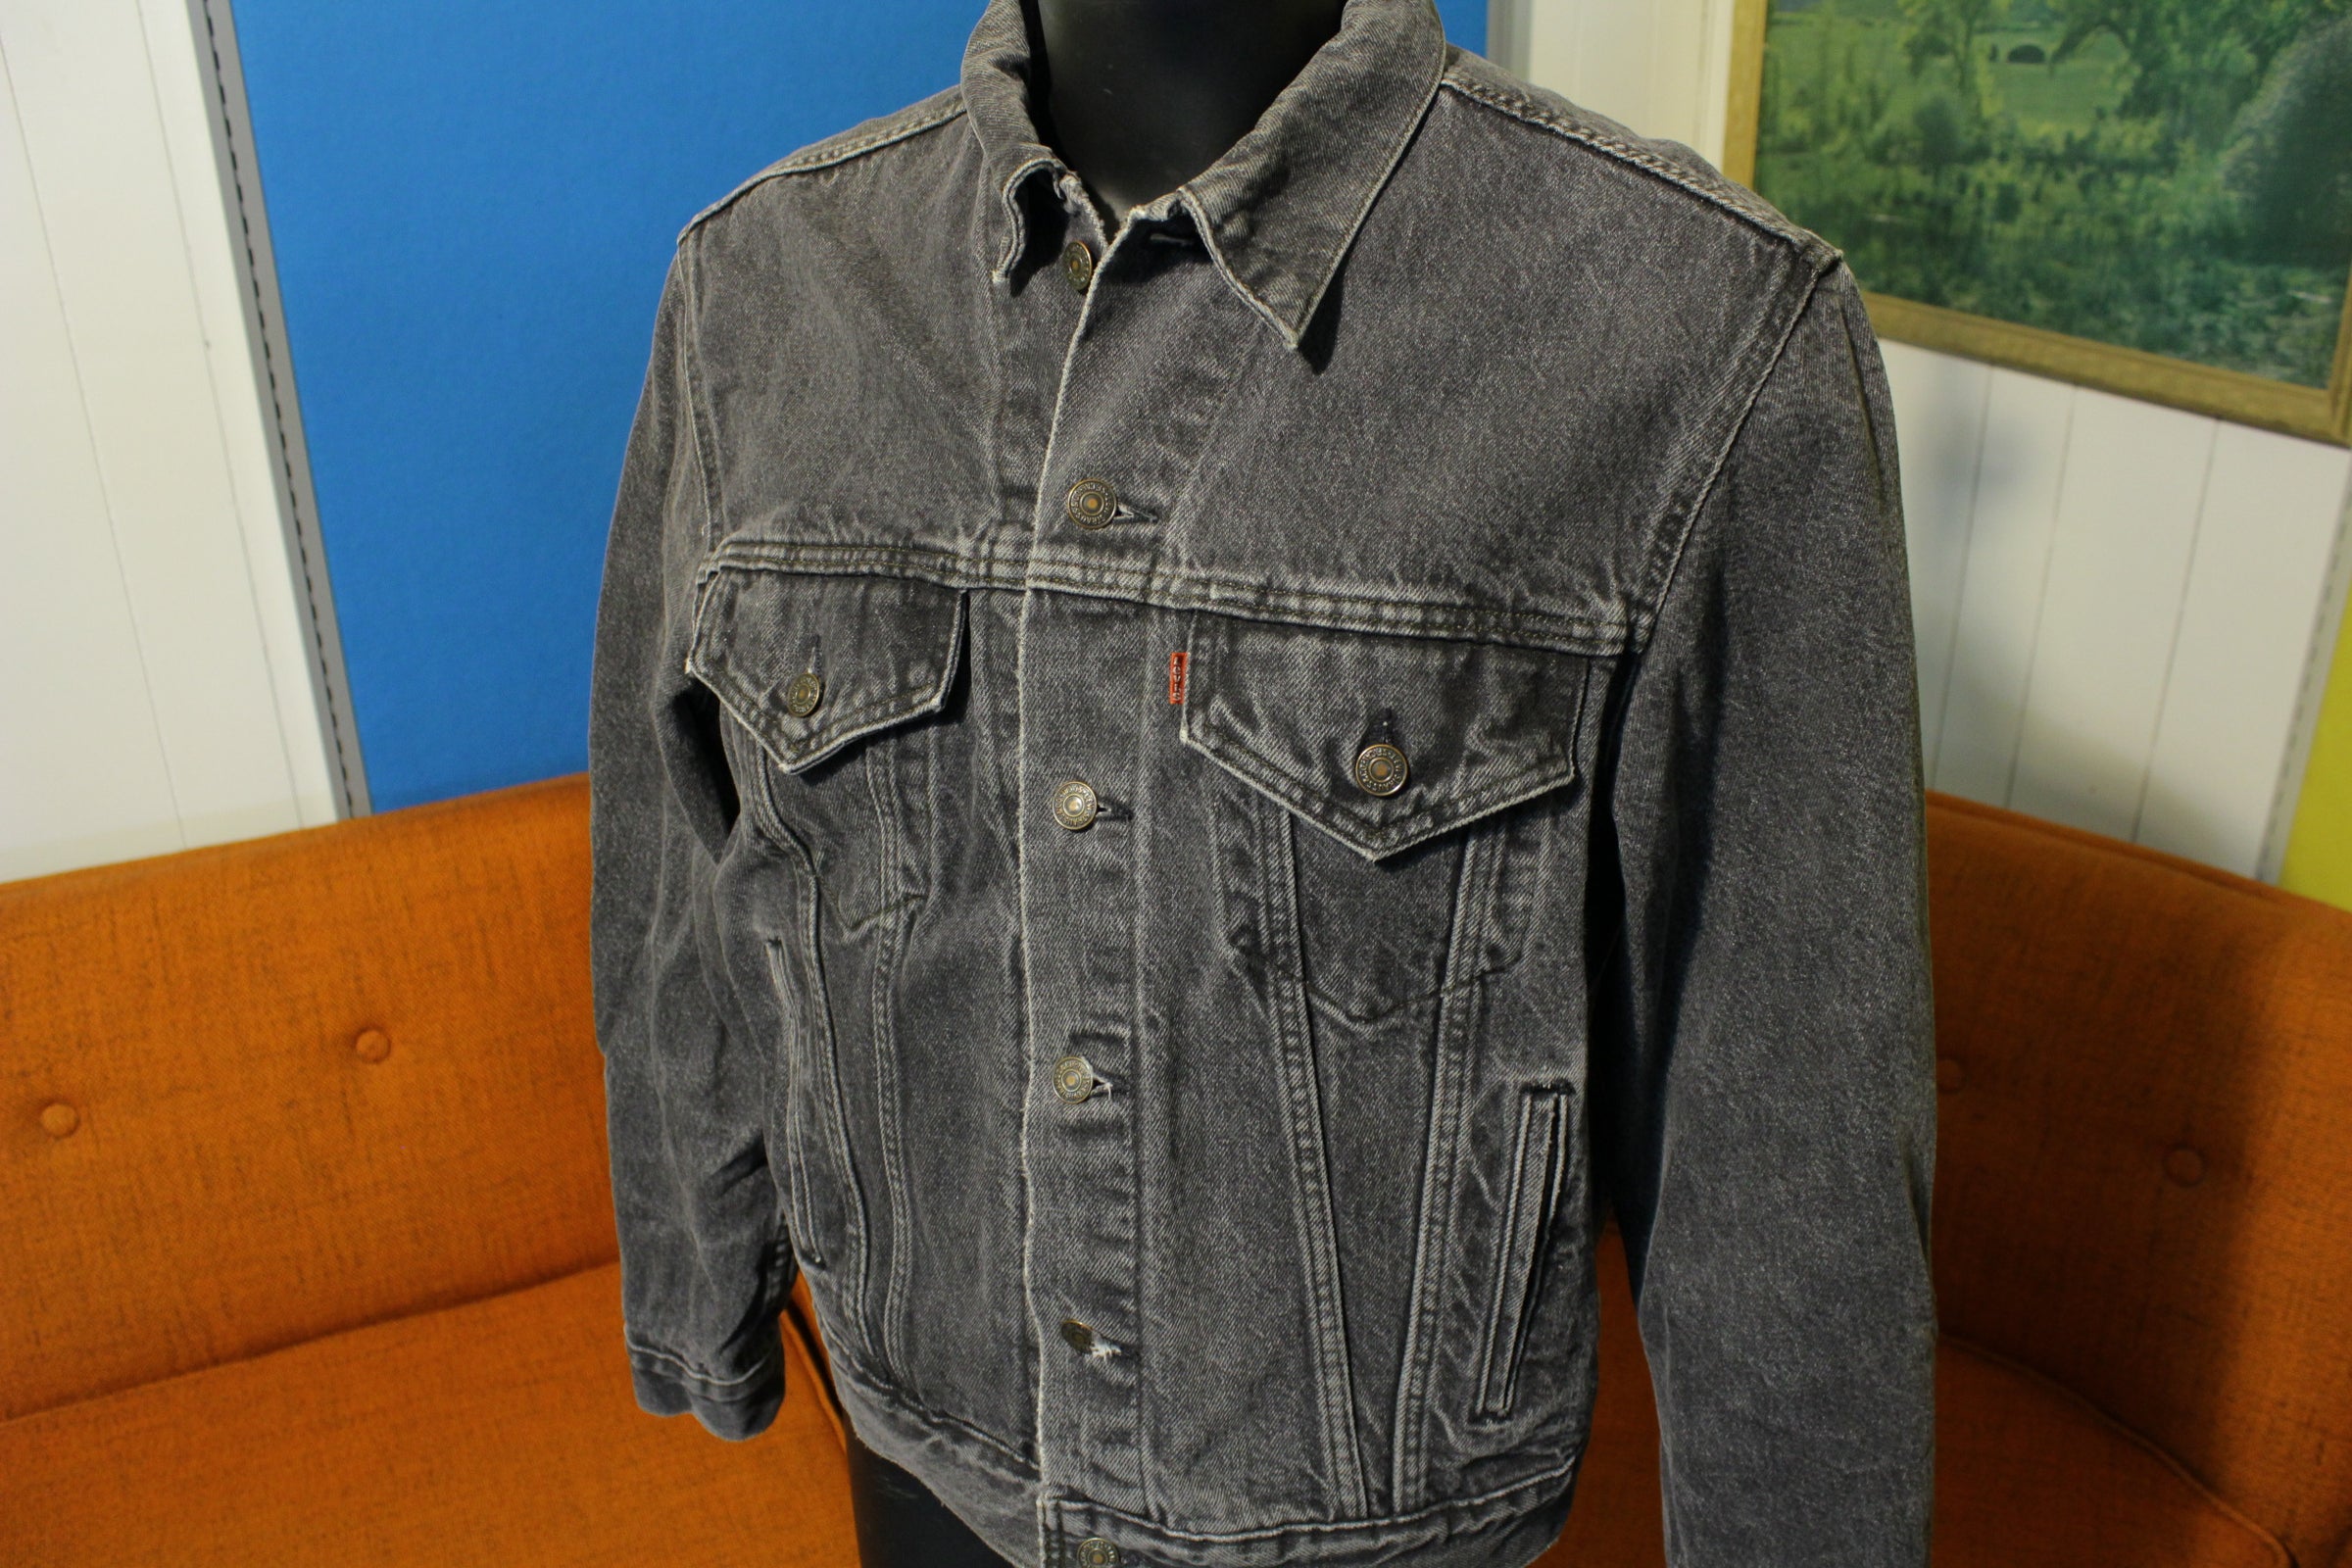 Seek商品一覧Levis/80s 70506 denim jacket made in USA - Gジャン